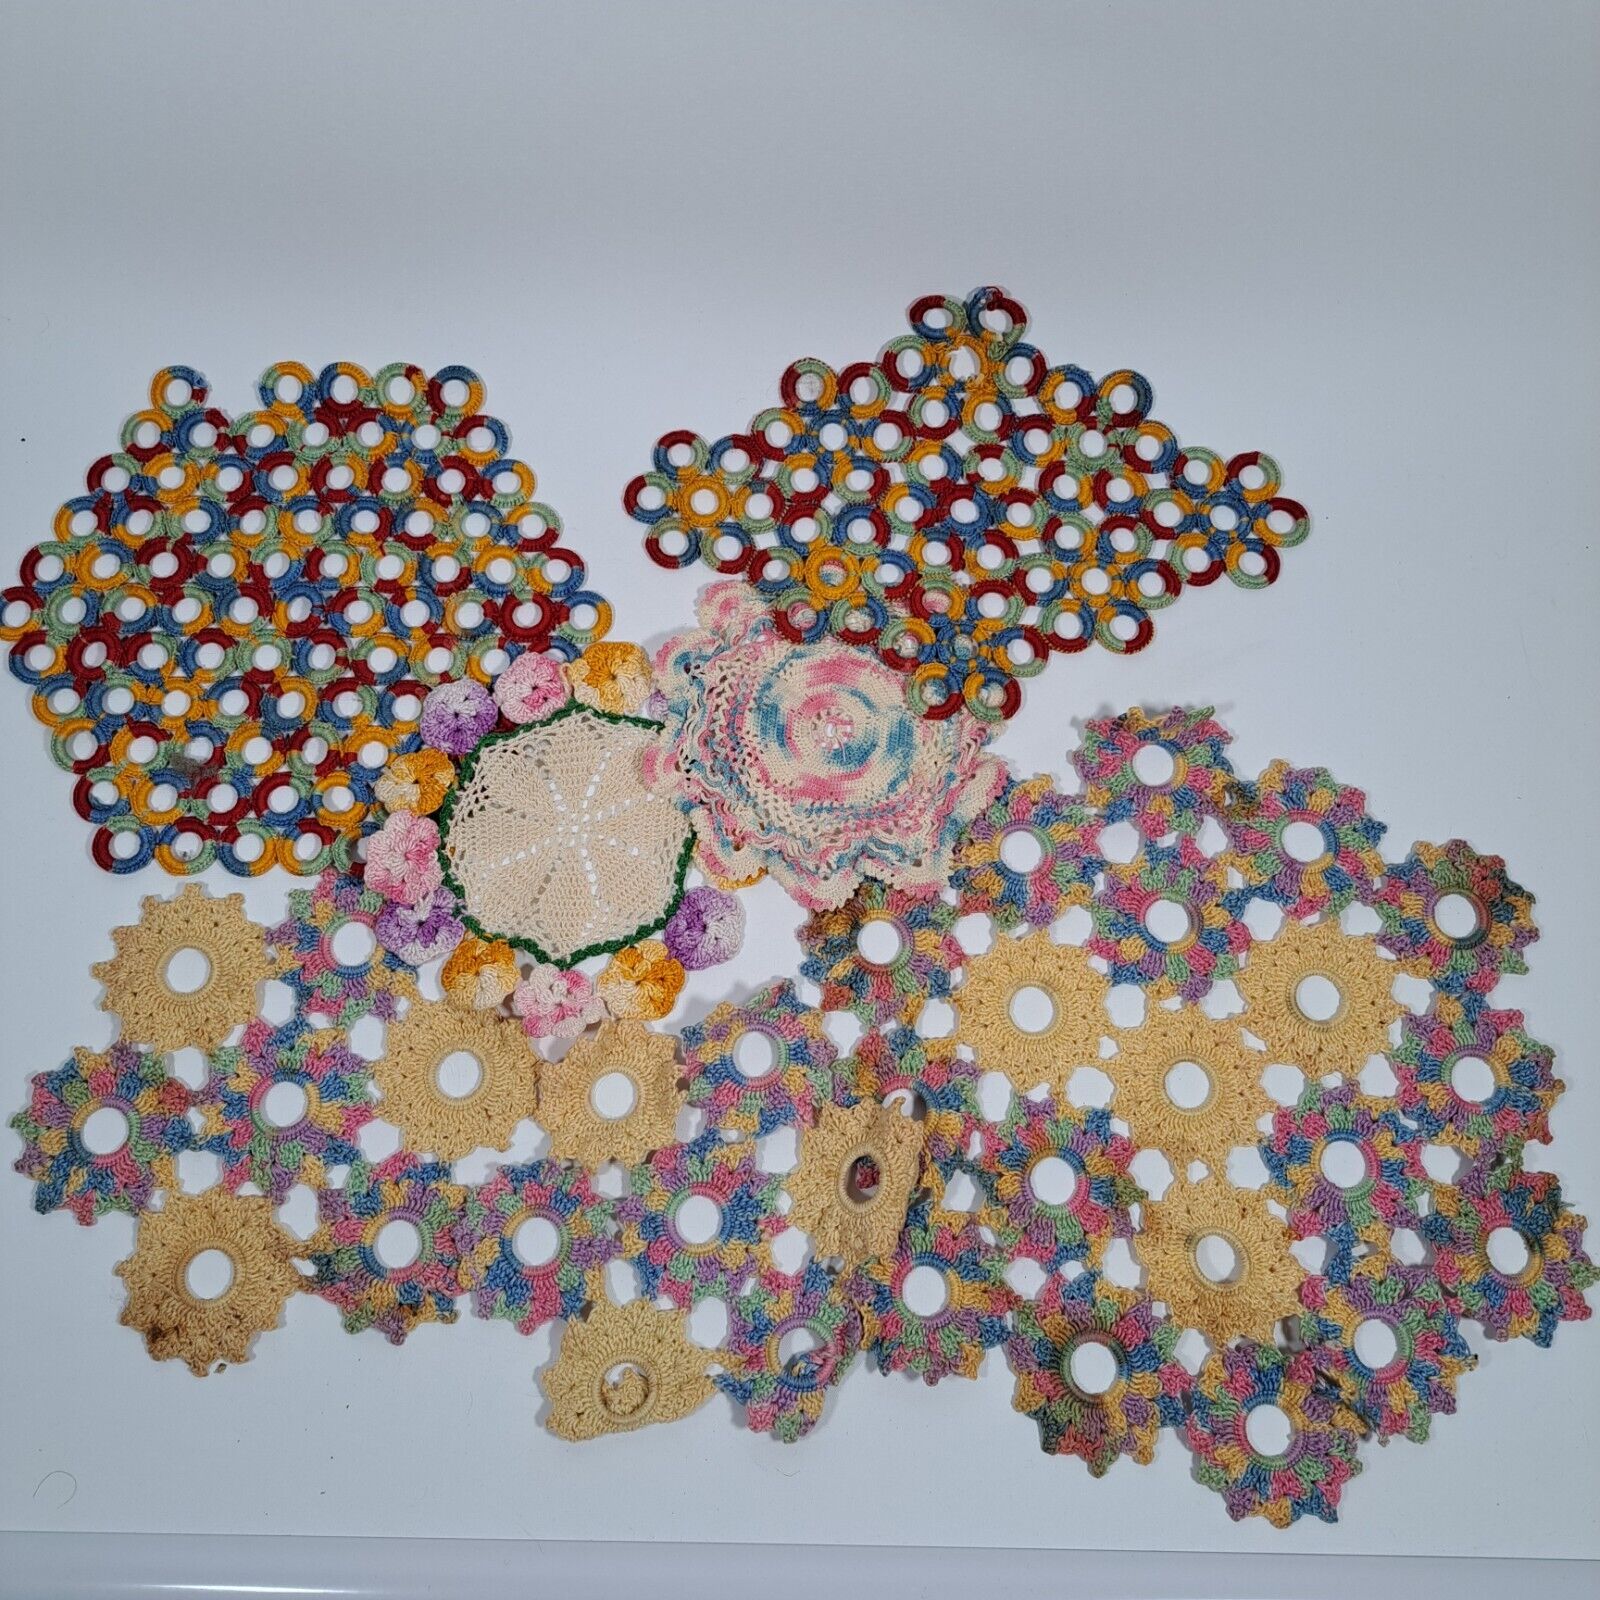 VTG TLC Crocheted Embroidered Doilies colorful Star hot pad